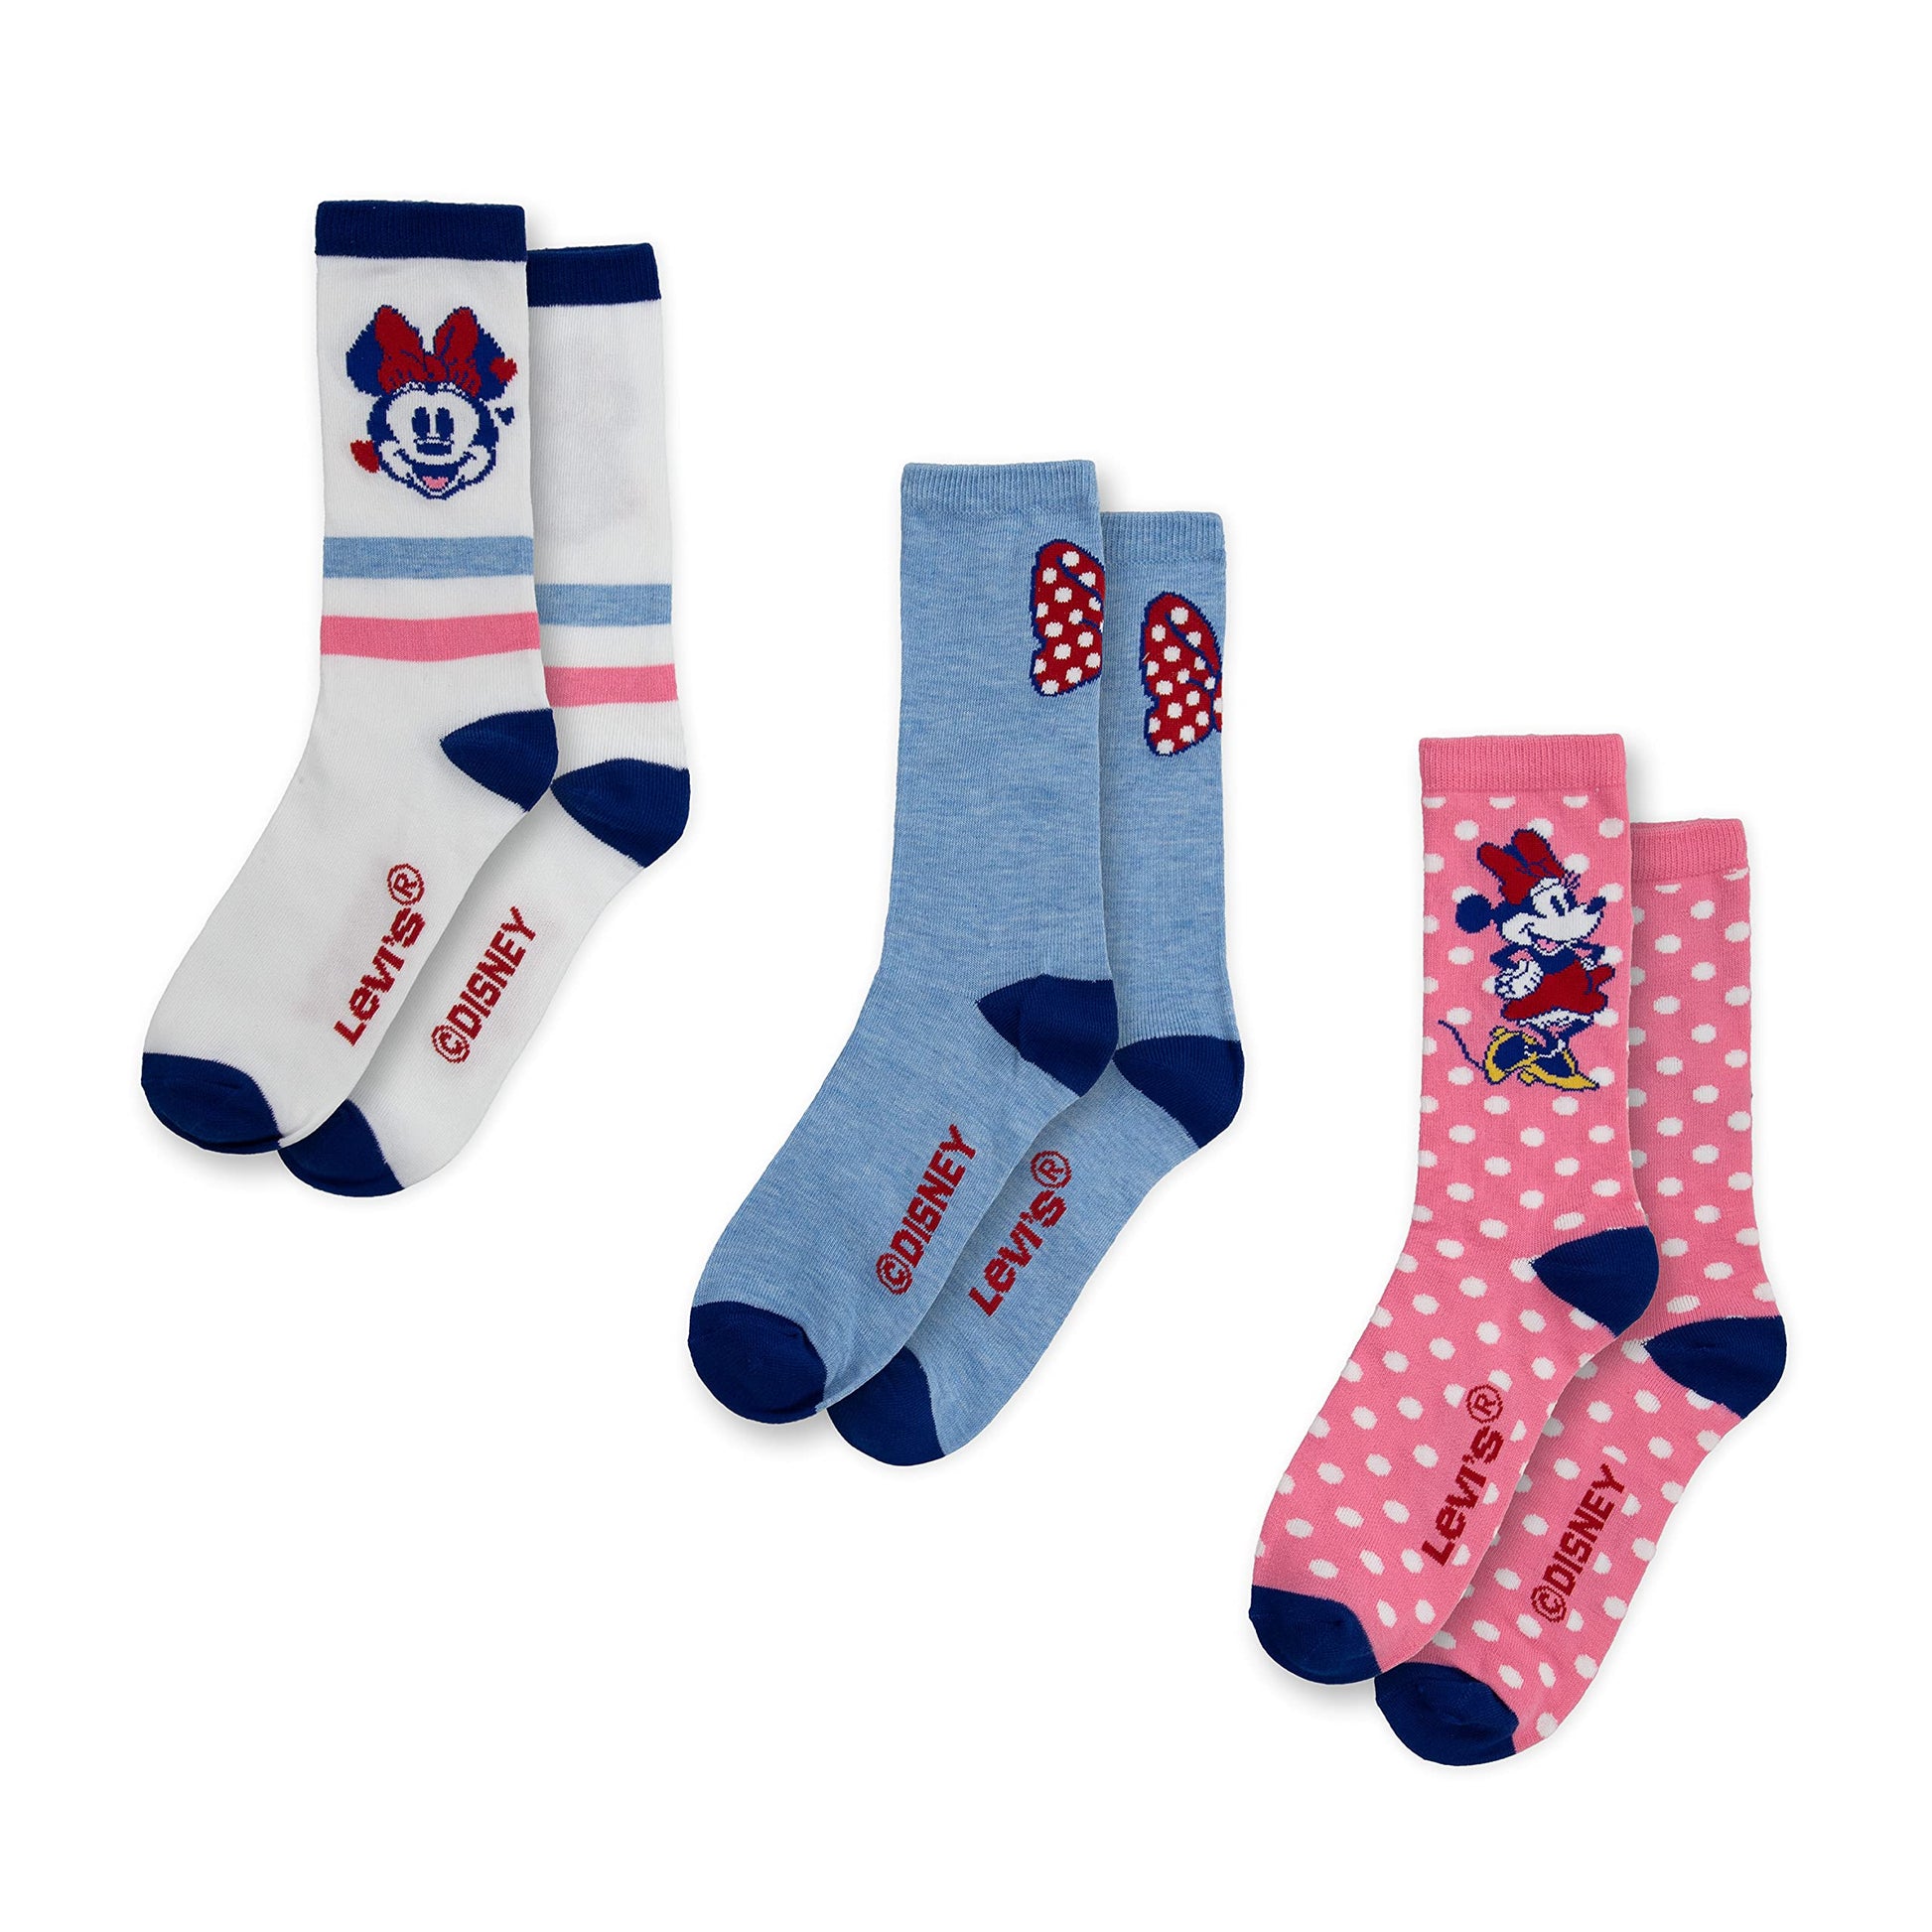 Image 2 of Levi's® x Disney Minnie Mouse Crew Socks 3-Pack (Toddler)